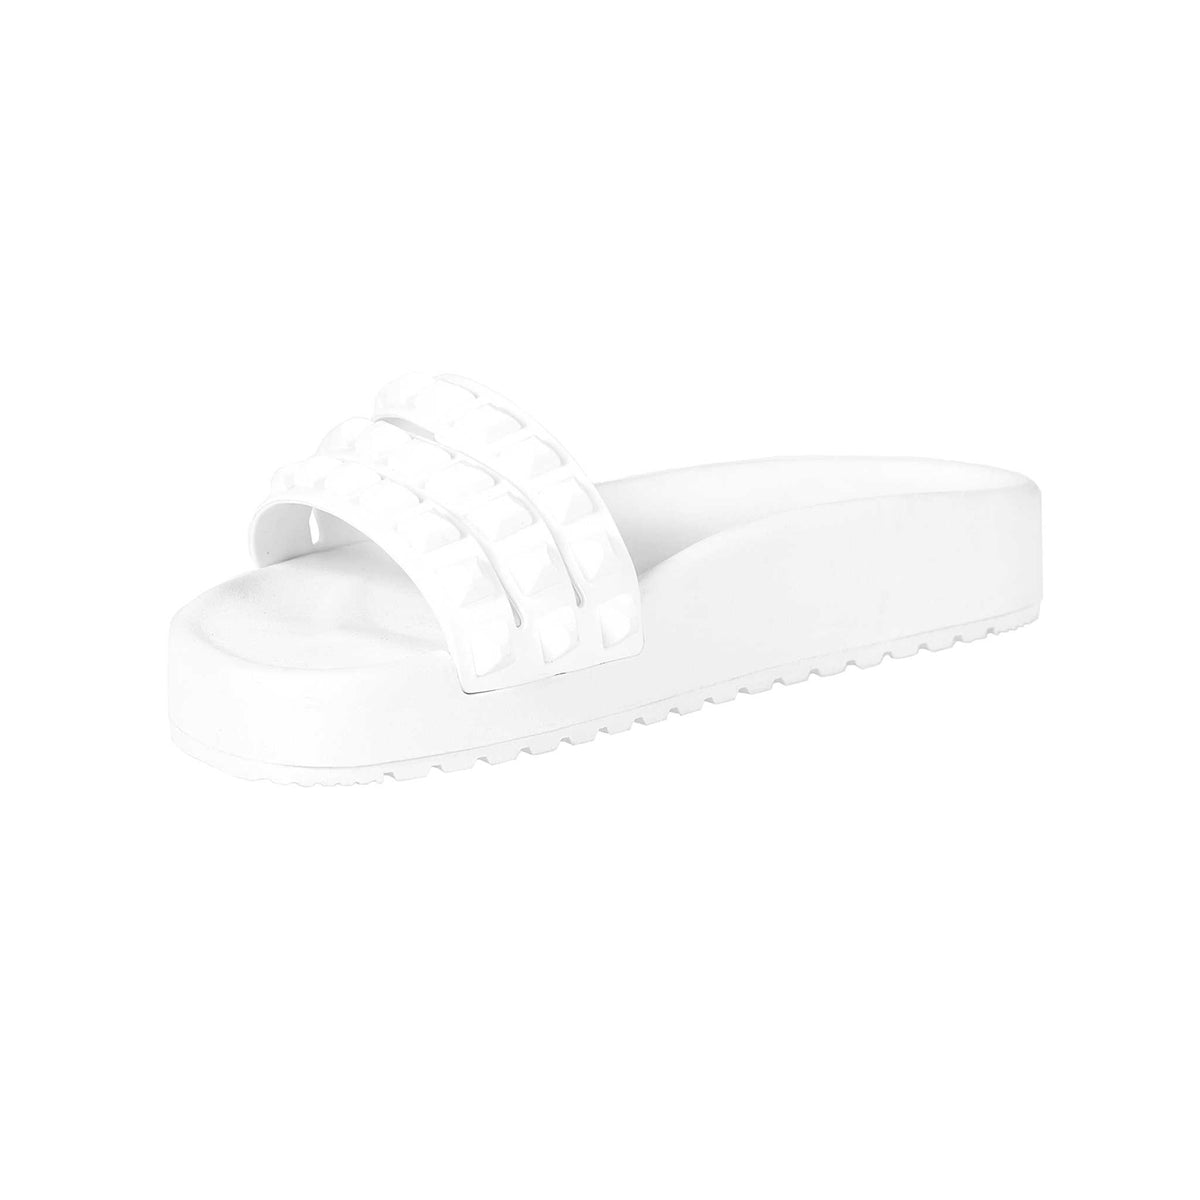 Sustainable 3 straps white sandals, jelly shoes for women, summer sandals from carmen sol